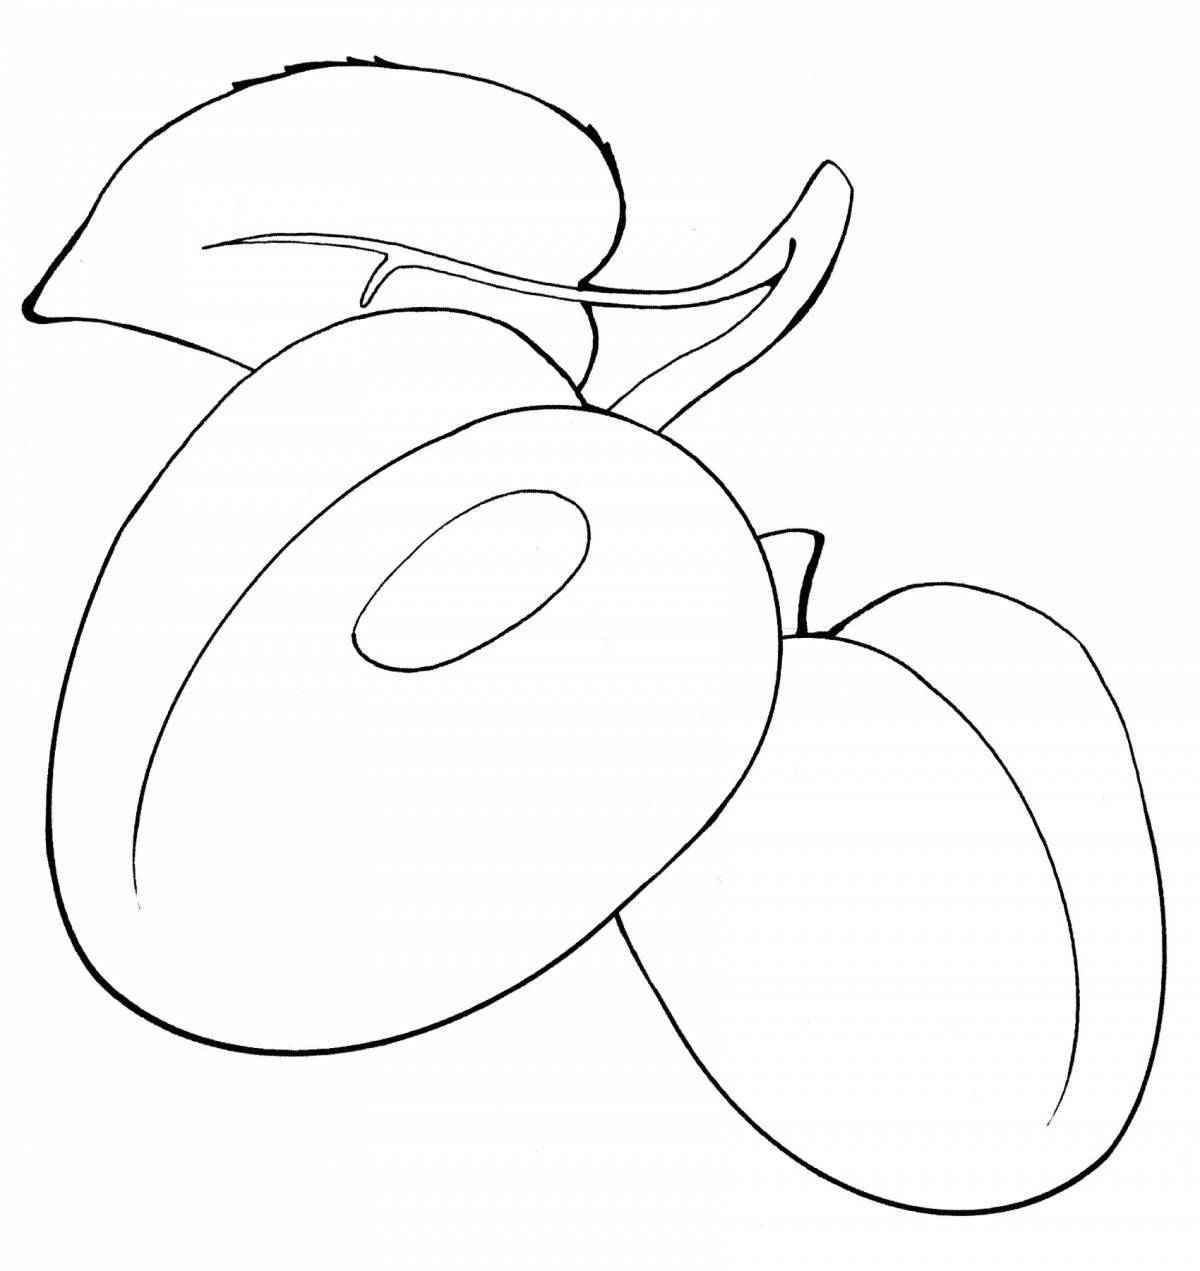 Amazing apricot coloring page for kids